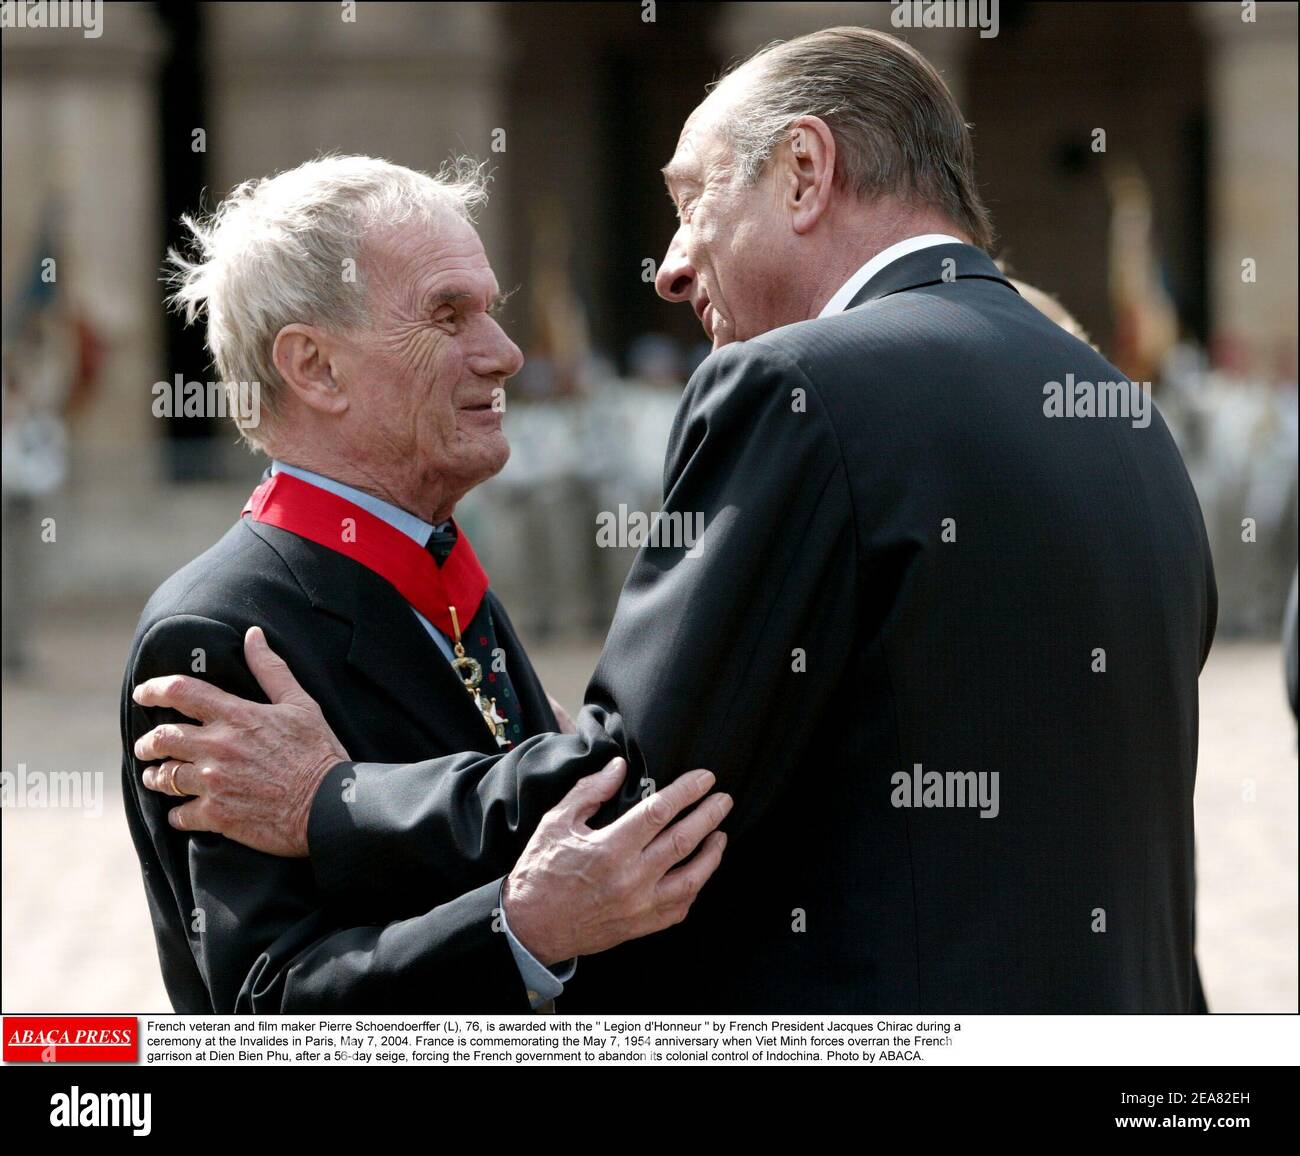 French veteran and film maker Pierre Schoendoerffer (L), 76, is awarded with the Legion d'Honneur by French President Jacques Chirac during a ceremony at the Invalides in Paris, May 7, 2004. France is commemorating the May 7, 1954 anniversary when Viet Minh forces overran the French garrison at Dien Bien Phu, after a 56-day seige, forcing the French government to abandon its colonial control of Indochina. Photo by ABACA. Stock Photo